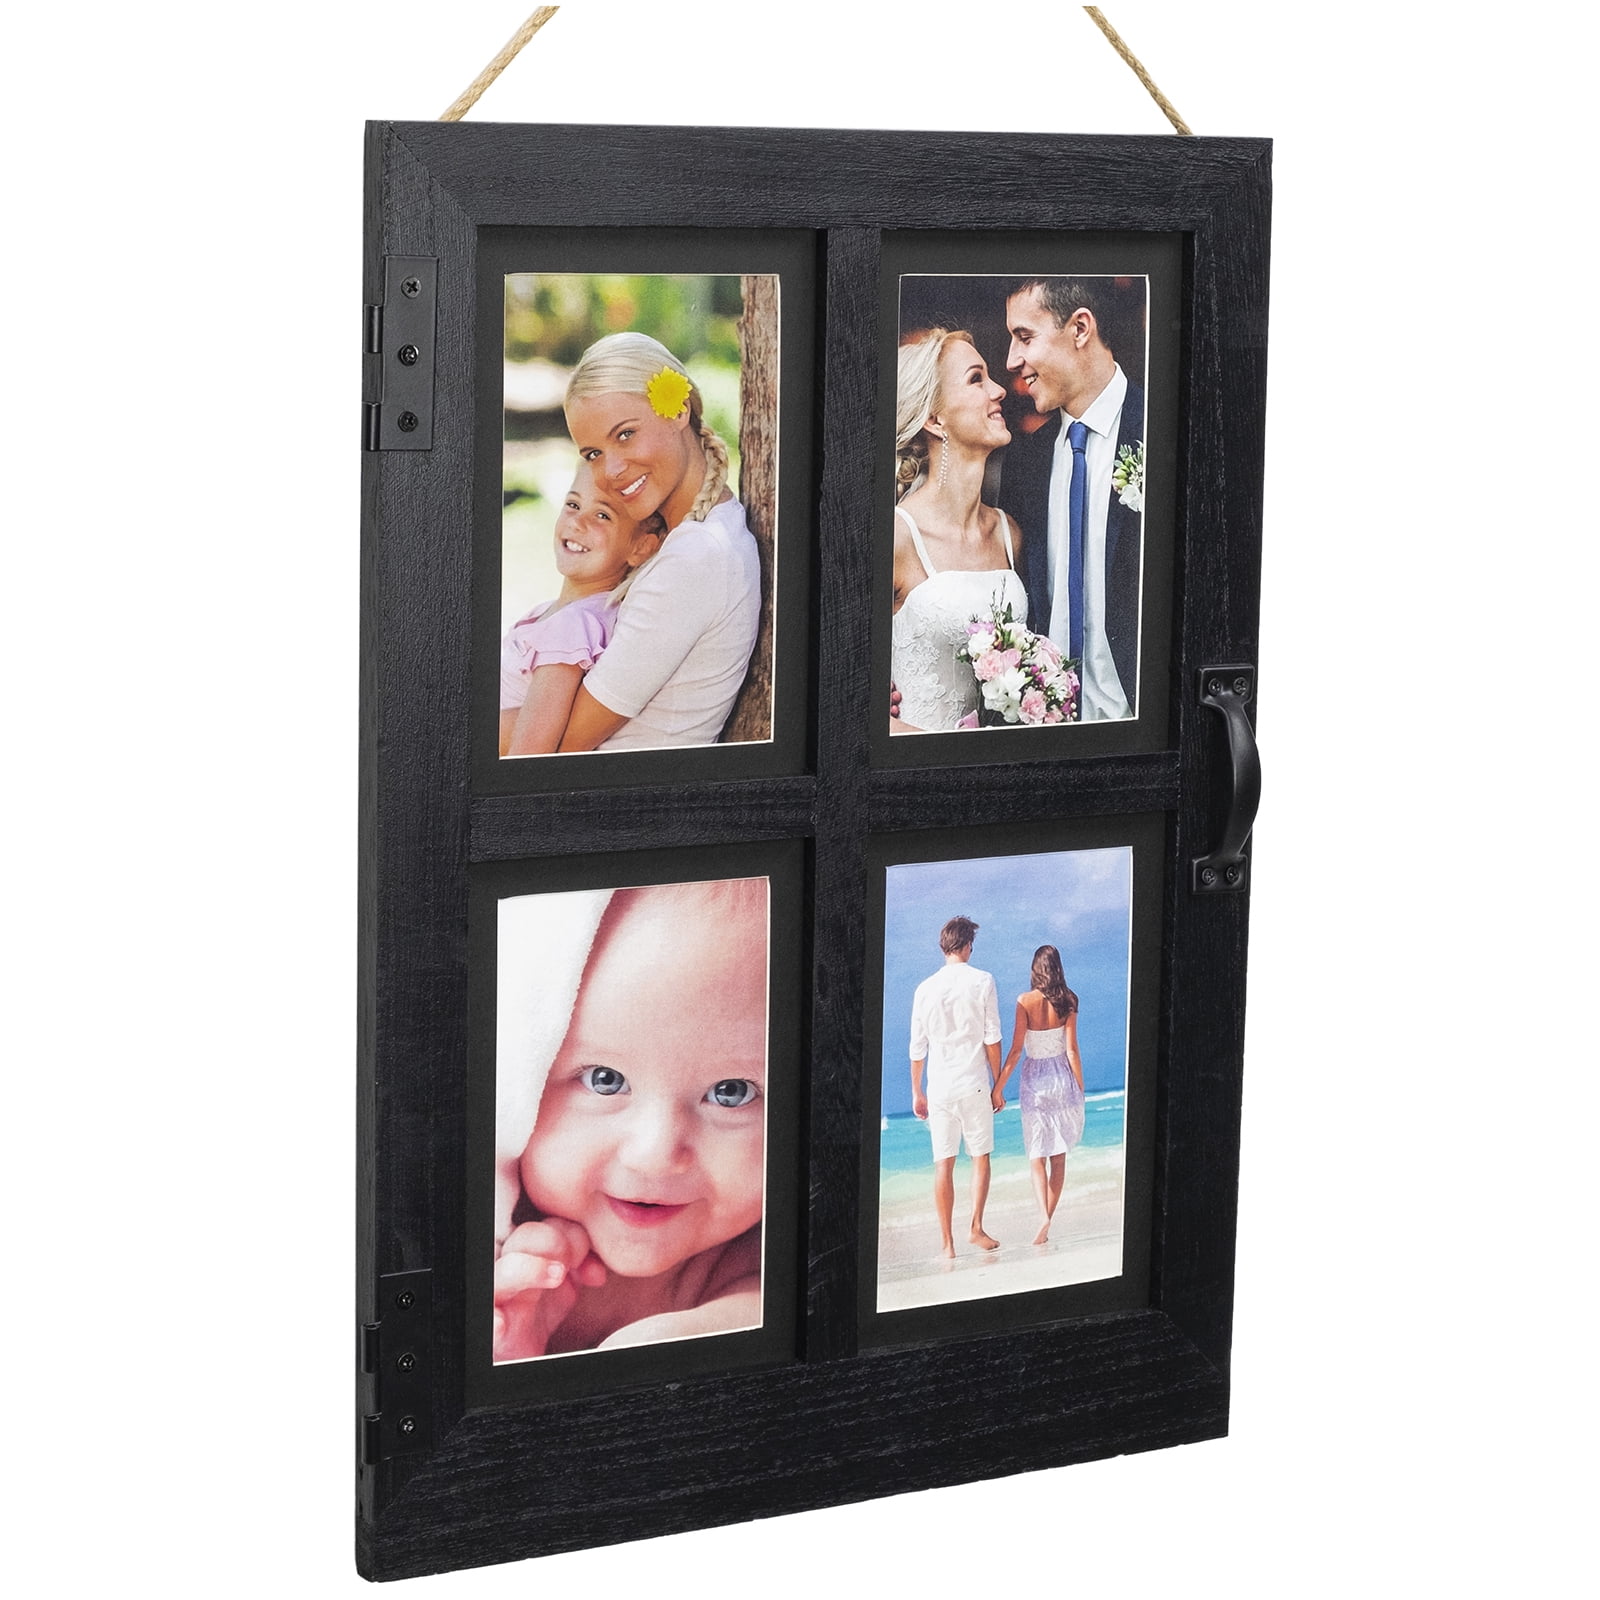 Excello Global Products Baby’s First Year Folding Picture Frame, Natural Wood Finish, Holds 1 4x6 Baby Photo, 12 Monthly Photos